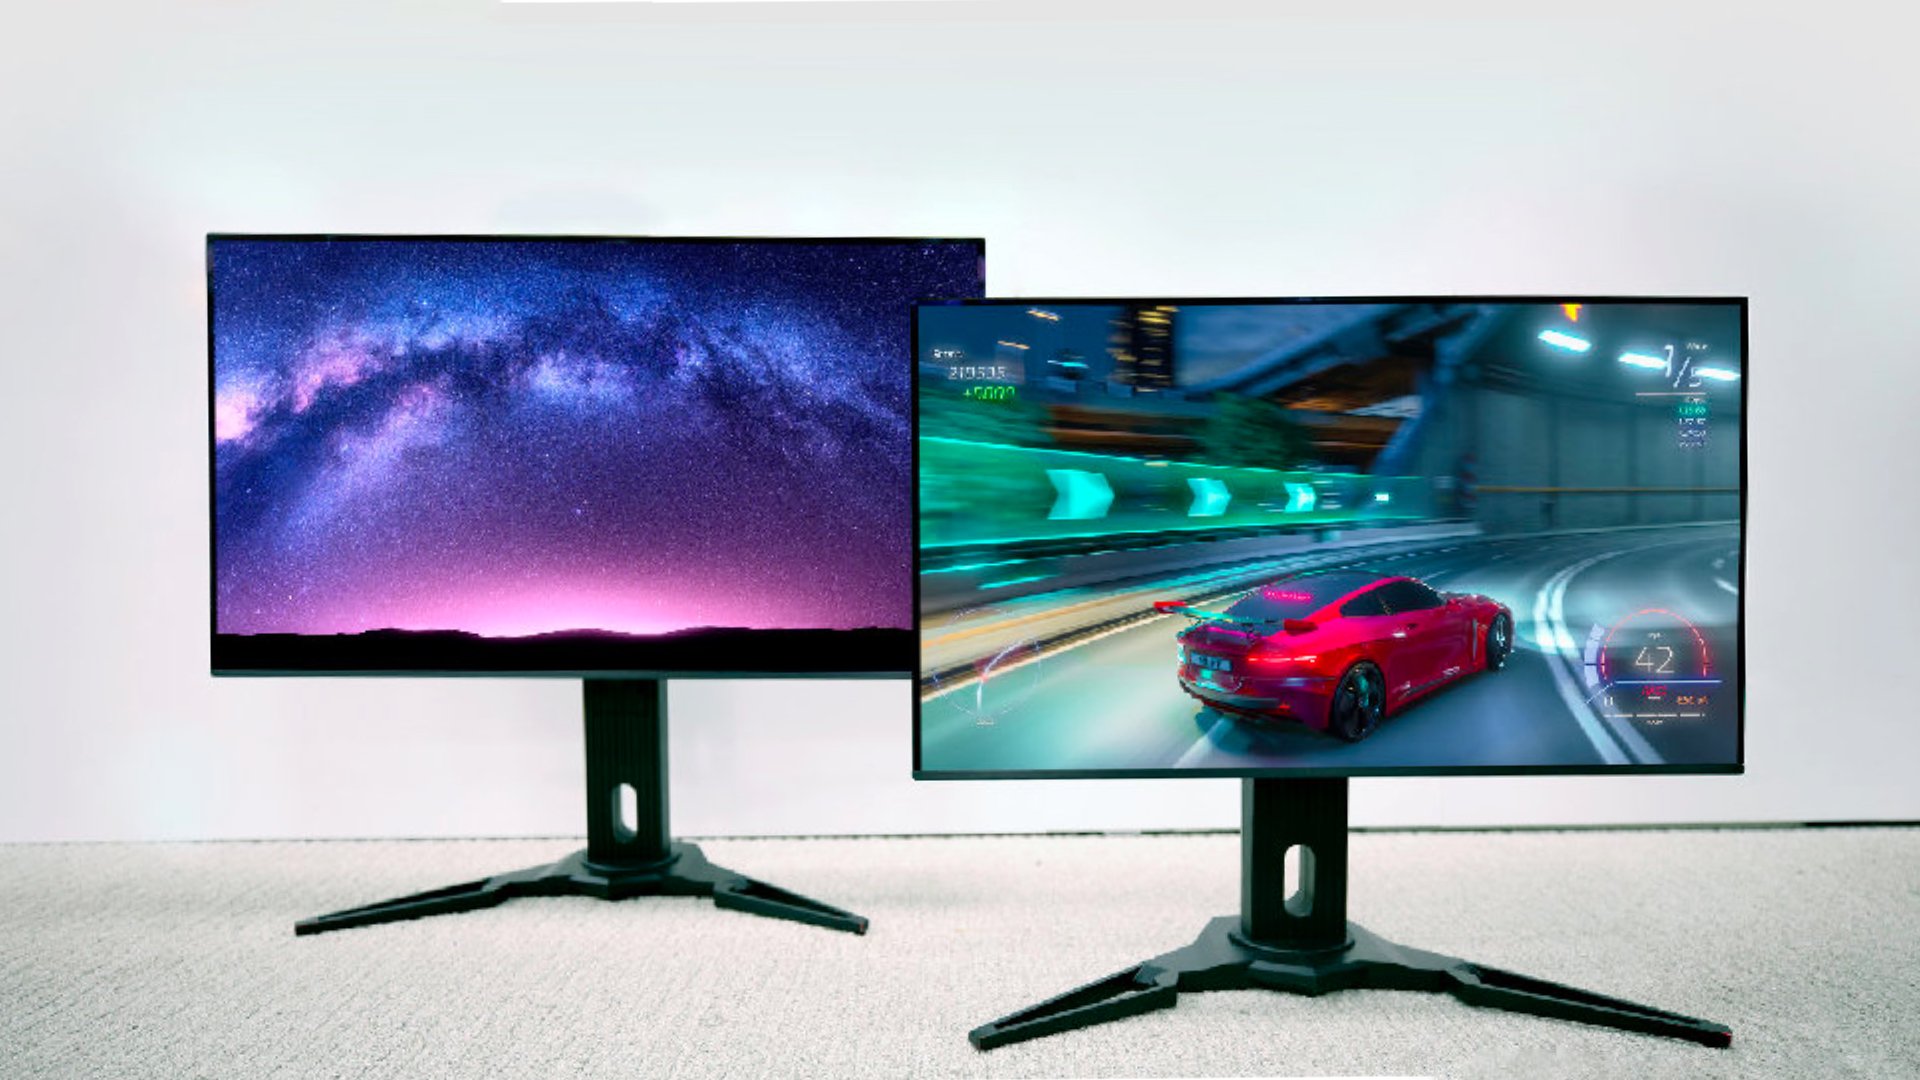 Samsung Unveils Its Expanded 2021 Odyssey Gaming Monitor – Samsung